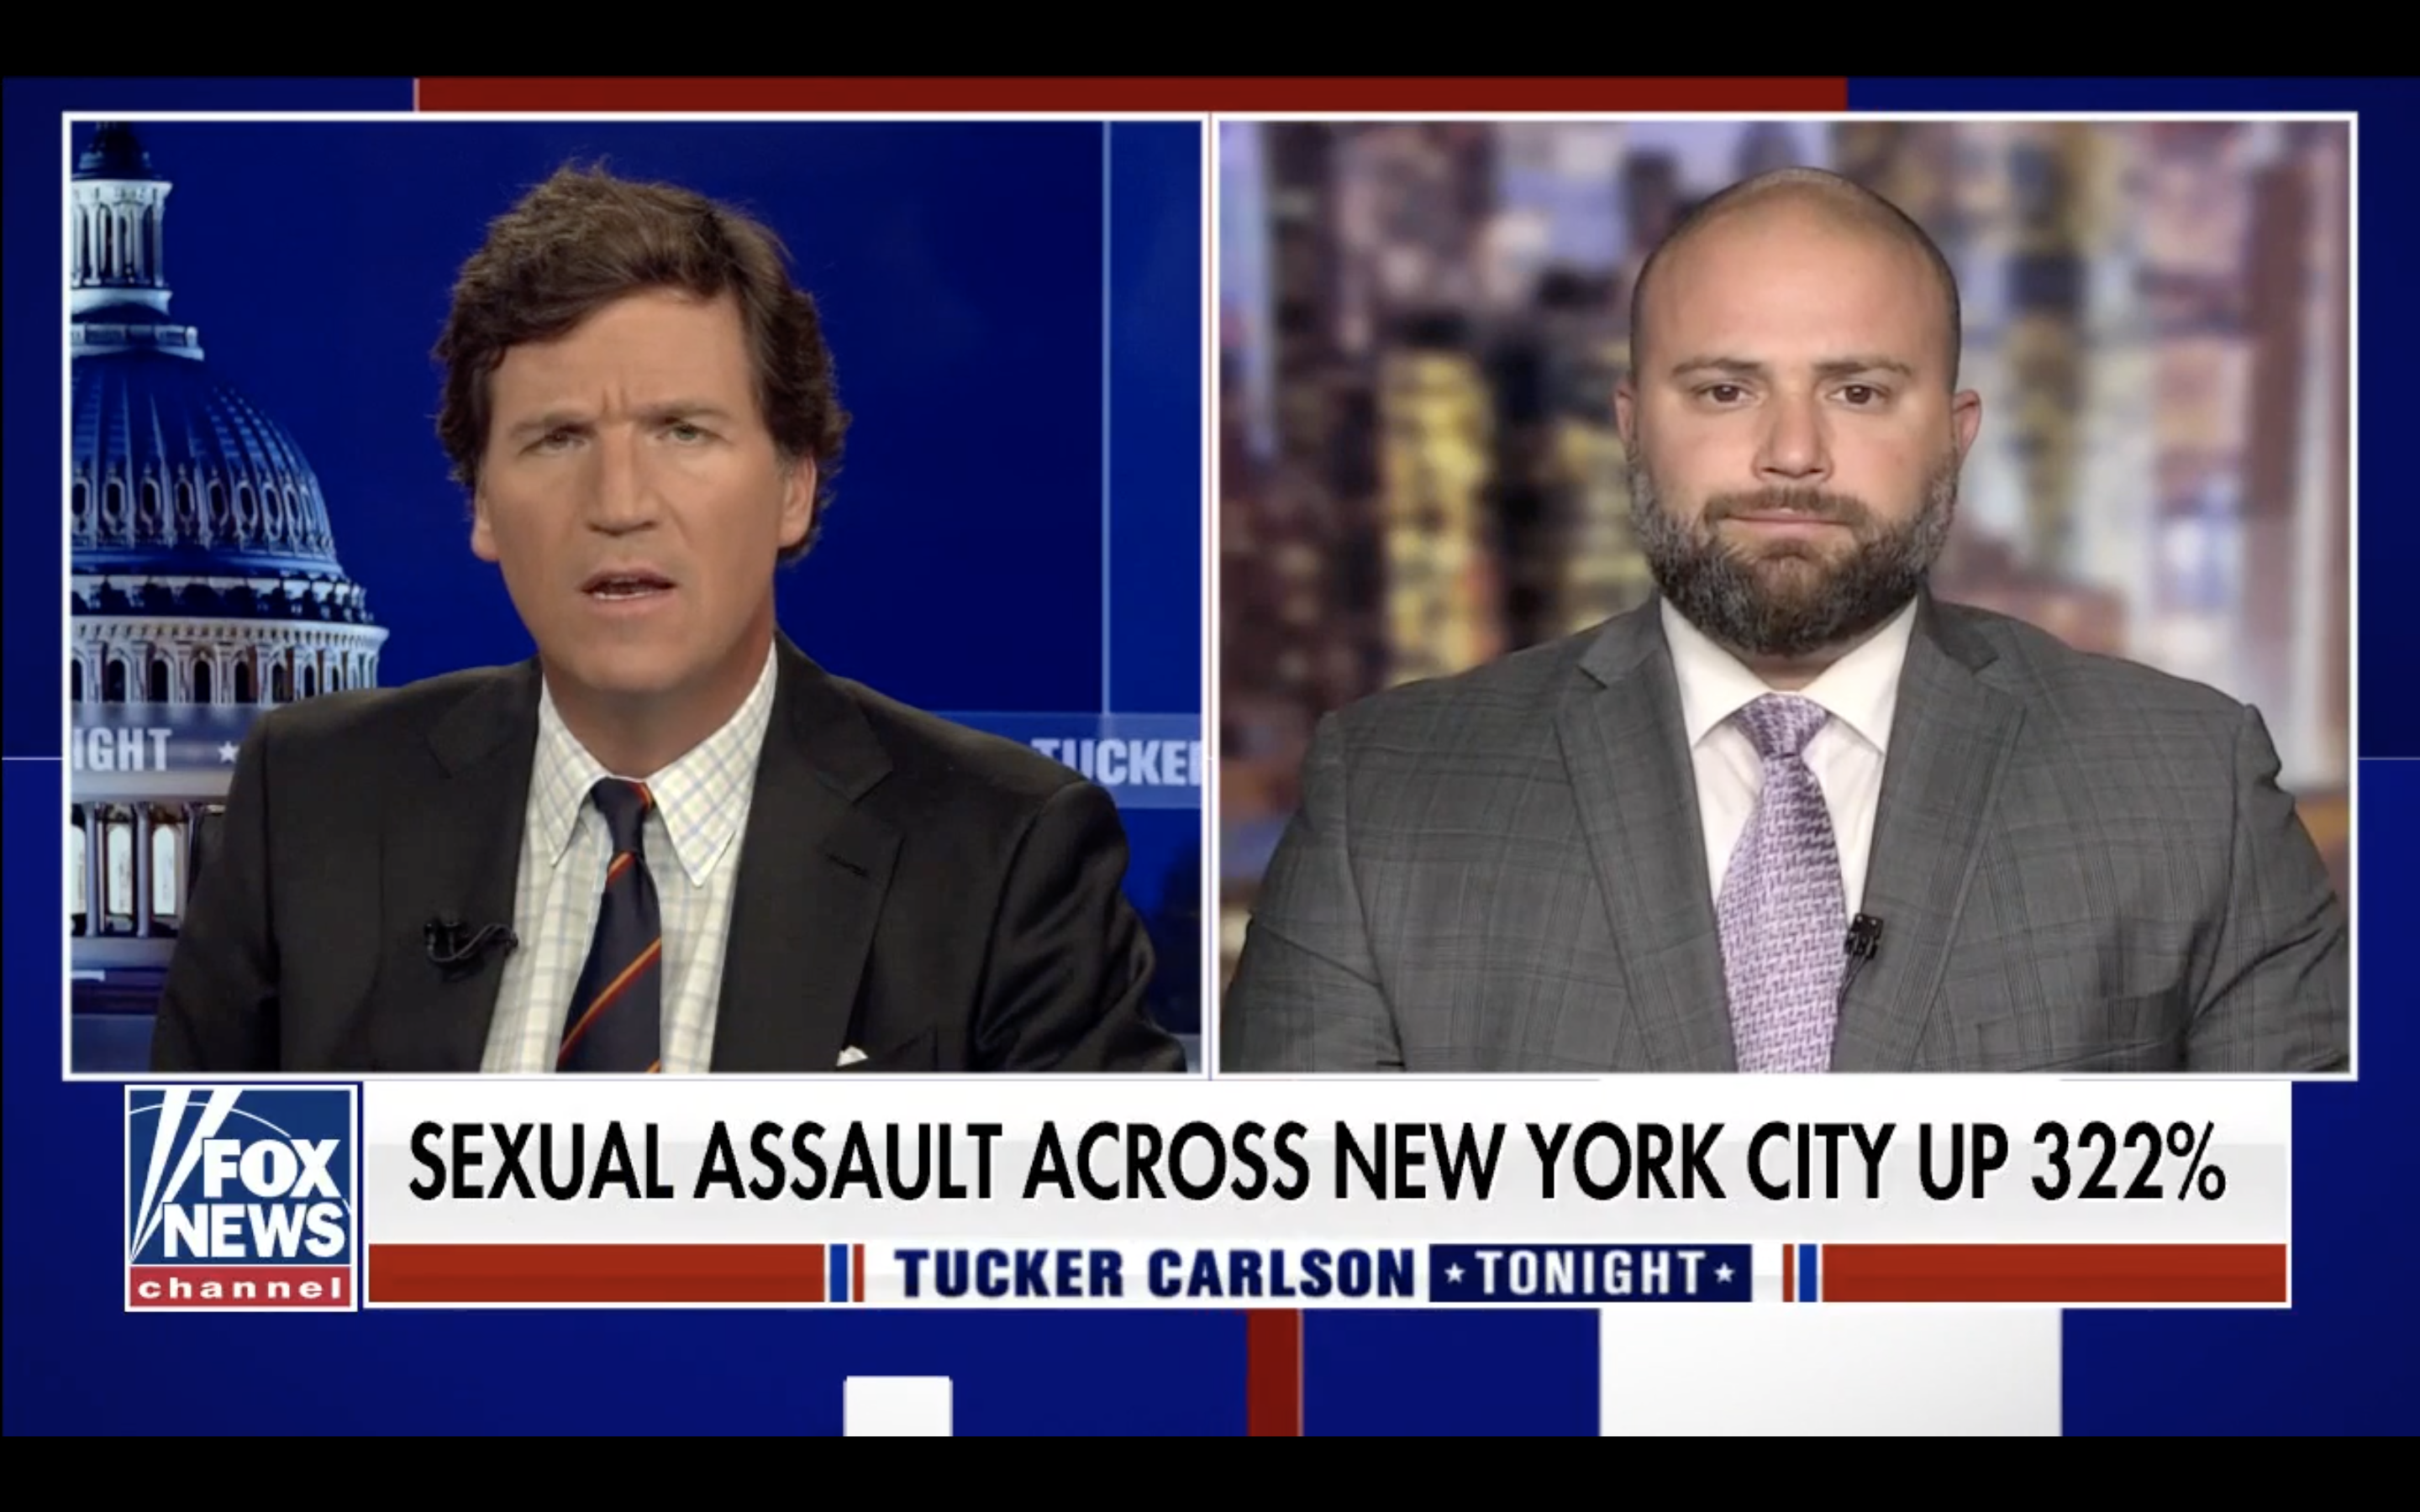 NYC councilman on crime spike: ‘I’m running out of reasons to tell people to stay’